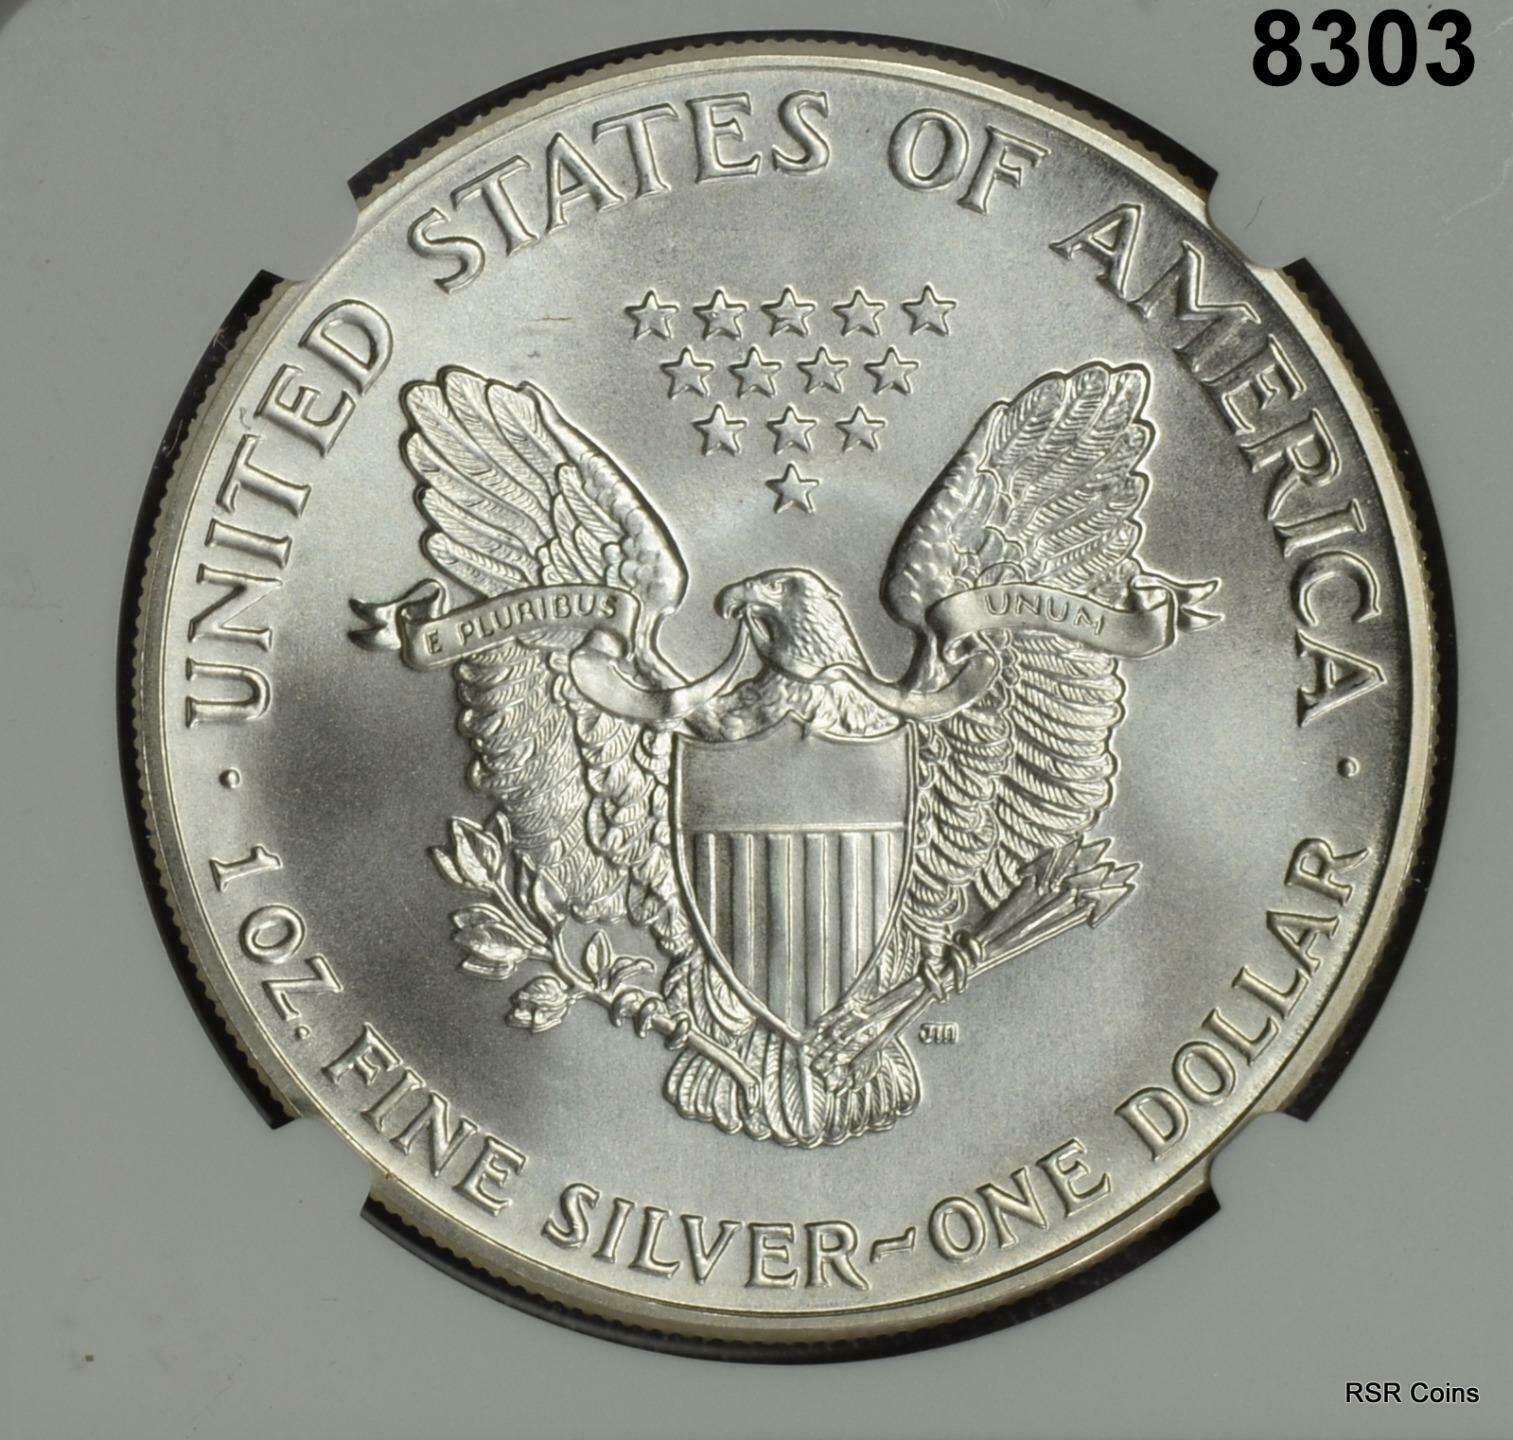 1986 AMERICAN .999 PURE SILVER DOLLAR EAGLE NGC CERTIFIED MS69 1ST YEAR #8303